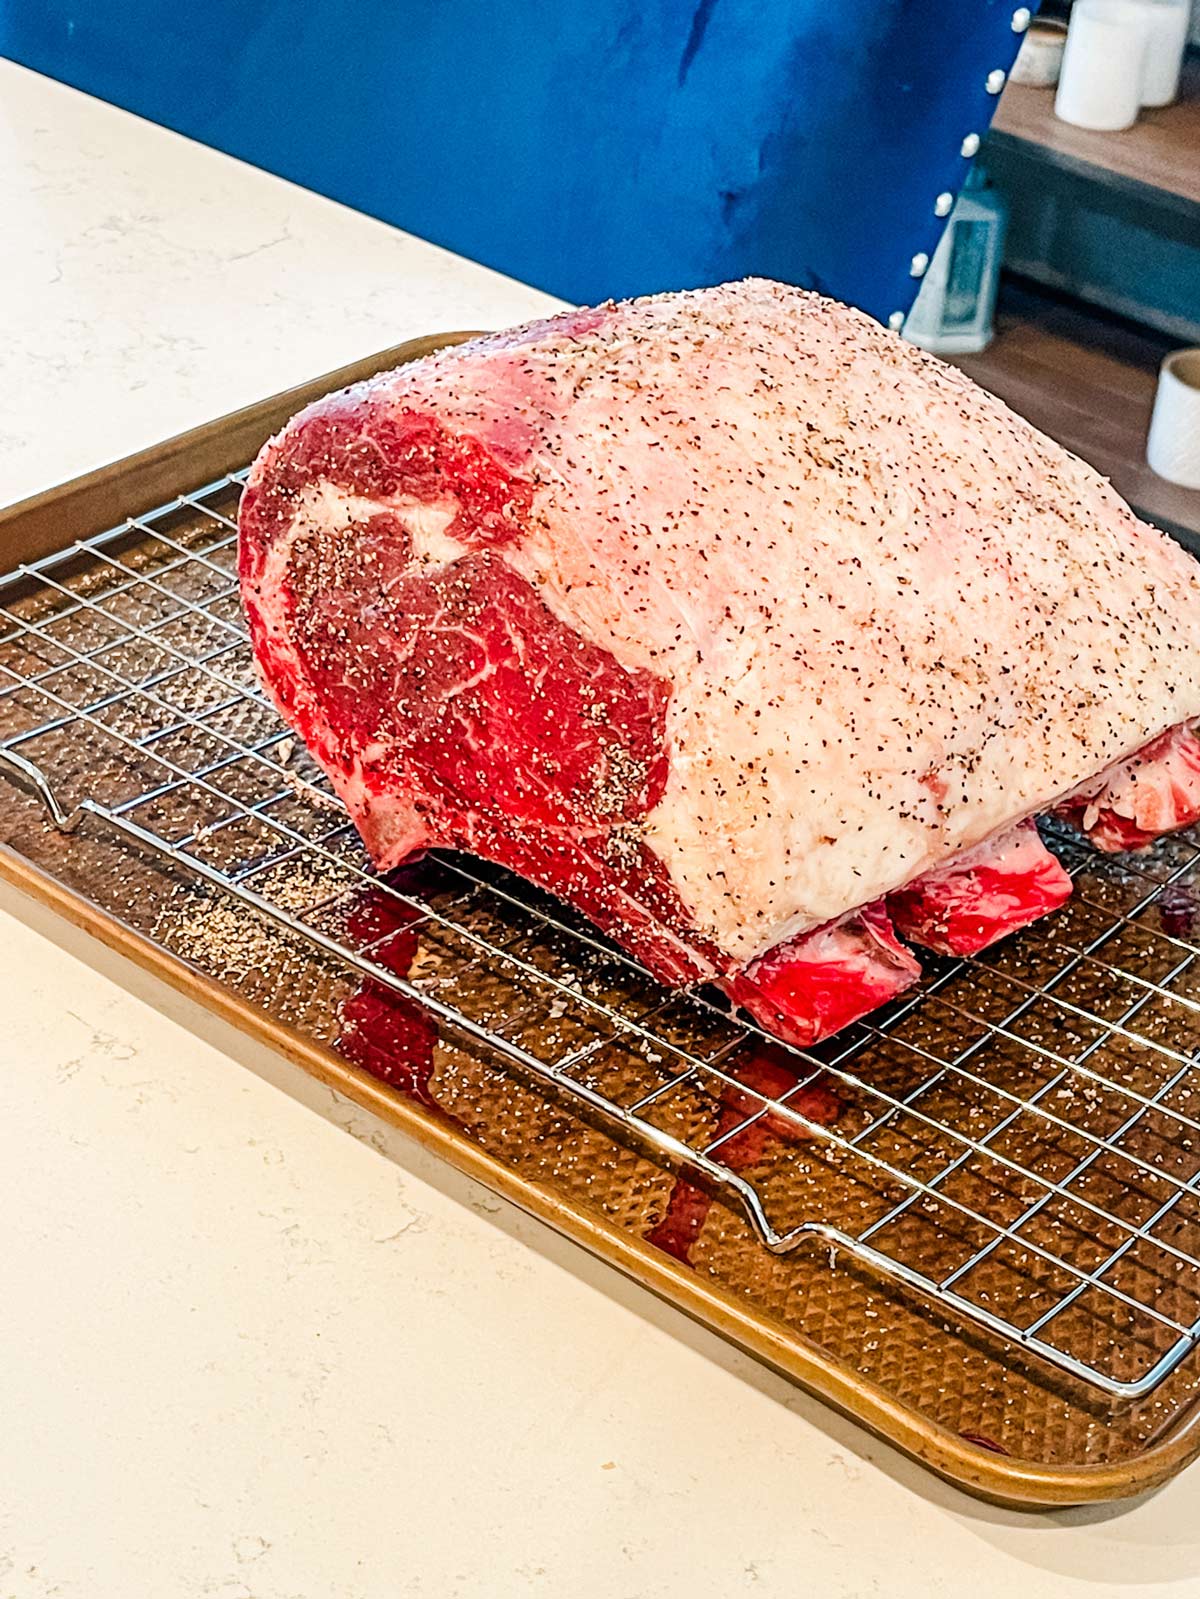 Seasoned prime rib roast in a rack sitting over a baking sheet after refrigerating overnight.